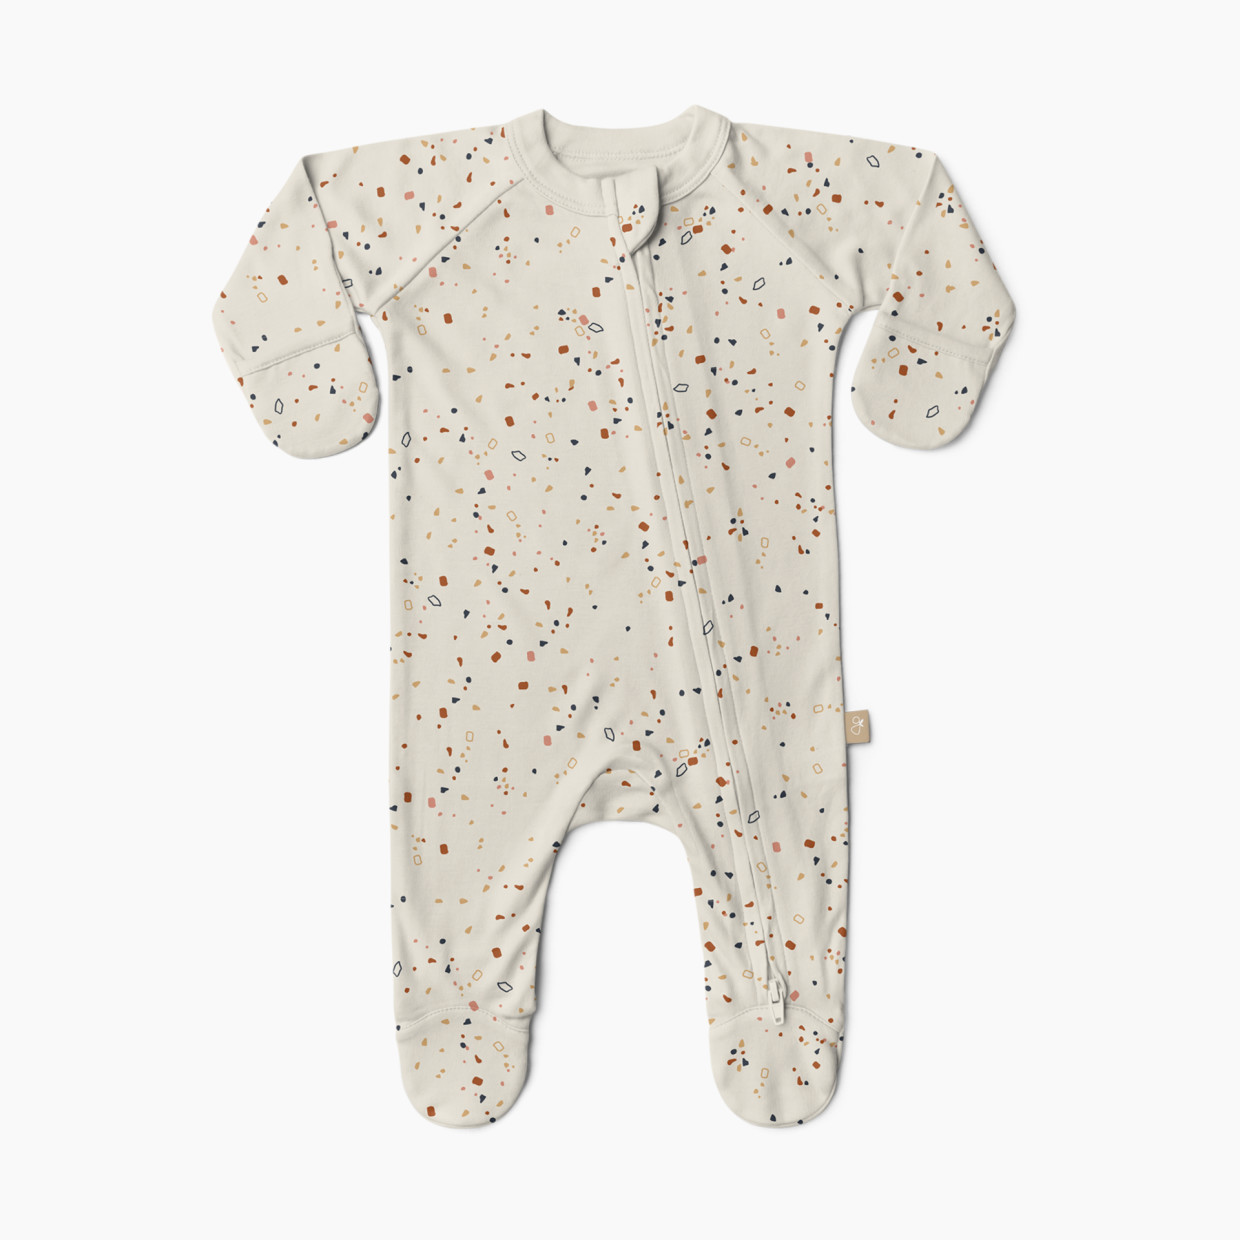 Goumi Kids x Babylist Grow With You Footie - Loose Fit - Terrazzo, 0-3 M.